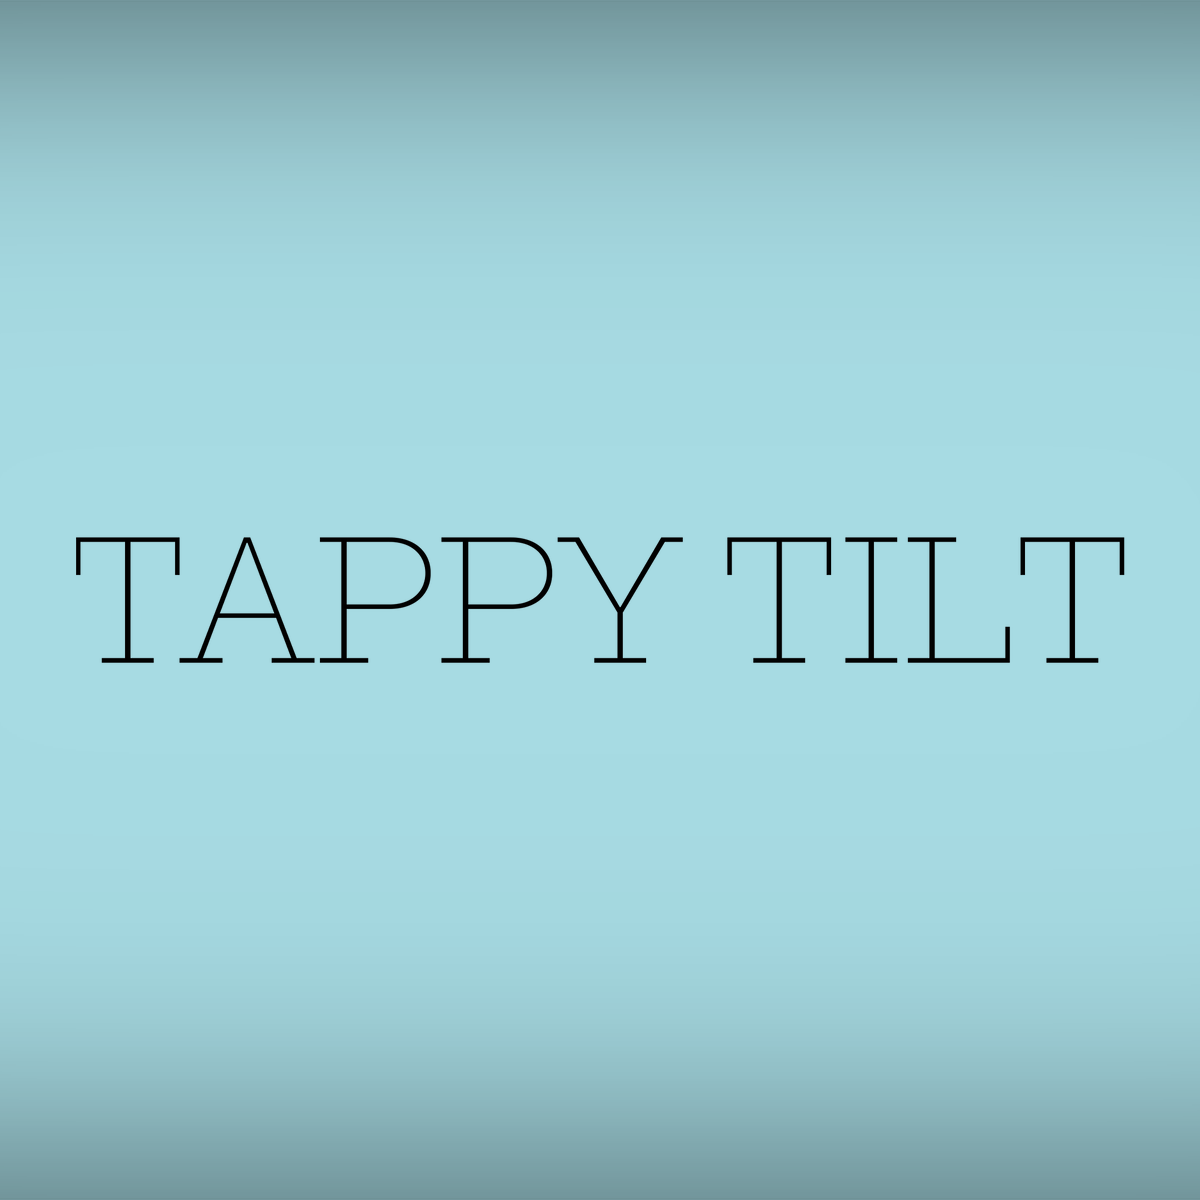 Our game Tappy Tilt is finally out! 😎 🇪🇺EU: PS4 bit.ly/3PN3l5m PS5 bit.ly/3PPUK1H 🇺🇸US: PS4 bit.ly/4aGMtVK PS5 bit.ly/4aAhH0E 🇭🇰Asia: PS4 bit.ly/4aFIpoJ PS5 bit.ly/4aGnHFq 🇯🇵Japan: PS4 bit.ly/3VFSZbf PS5